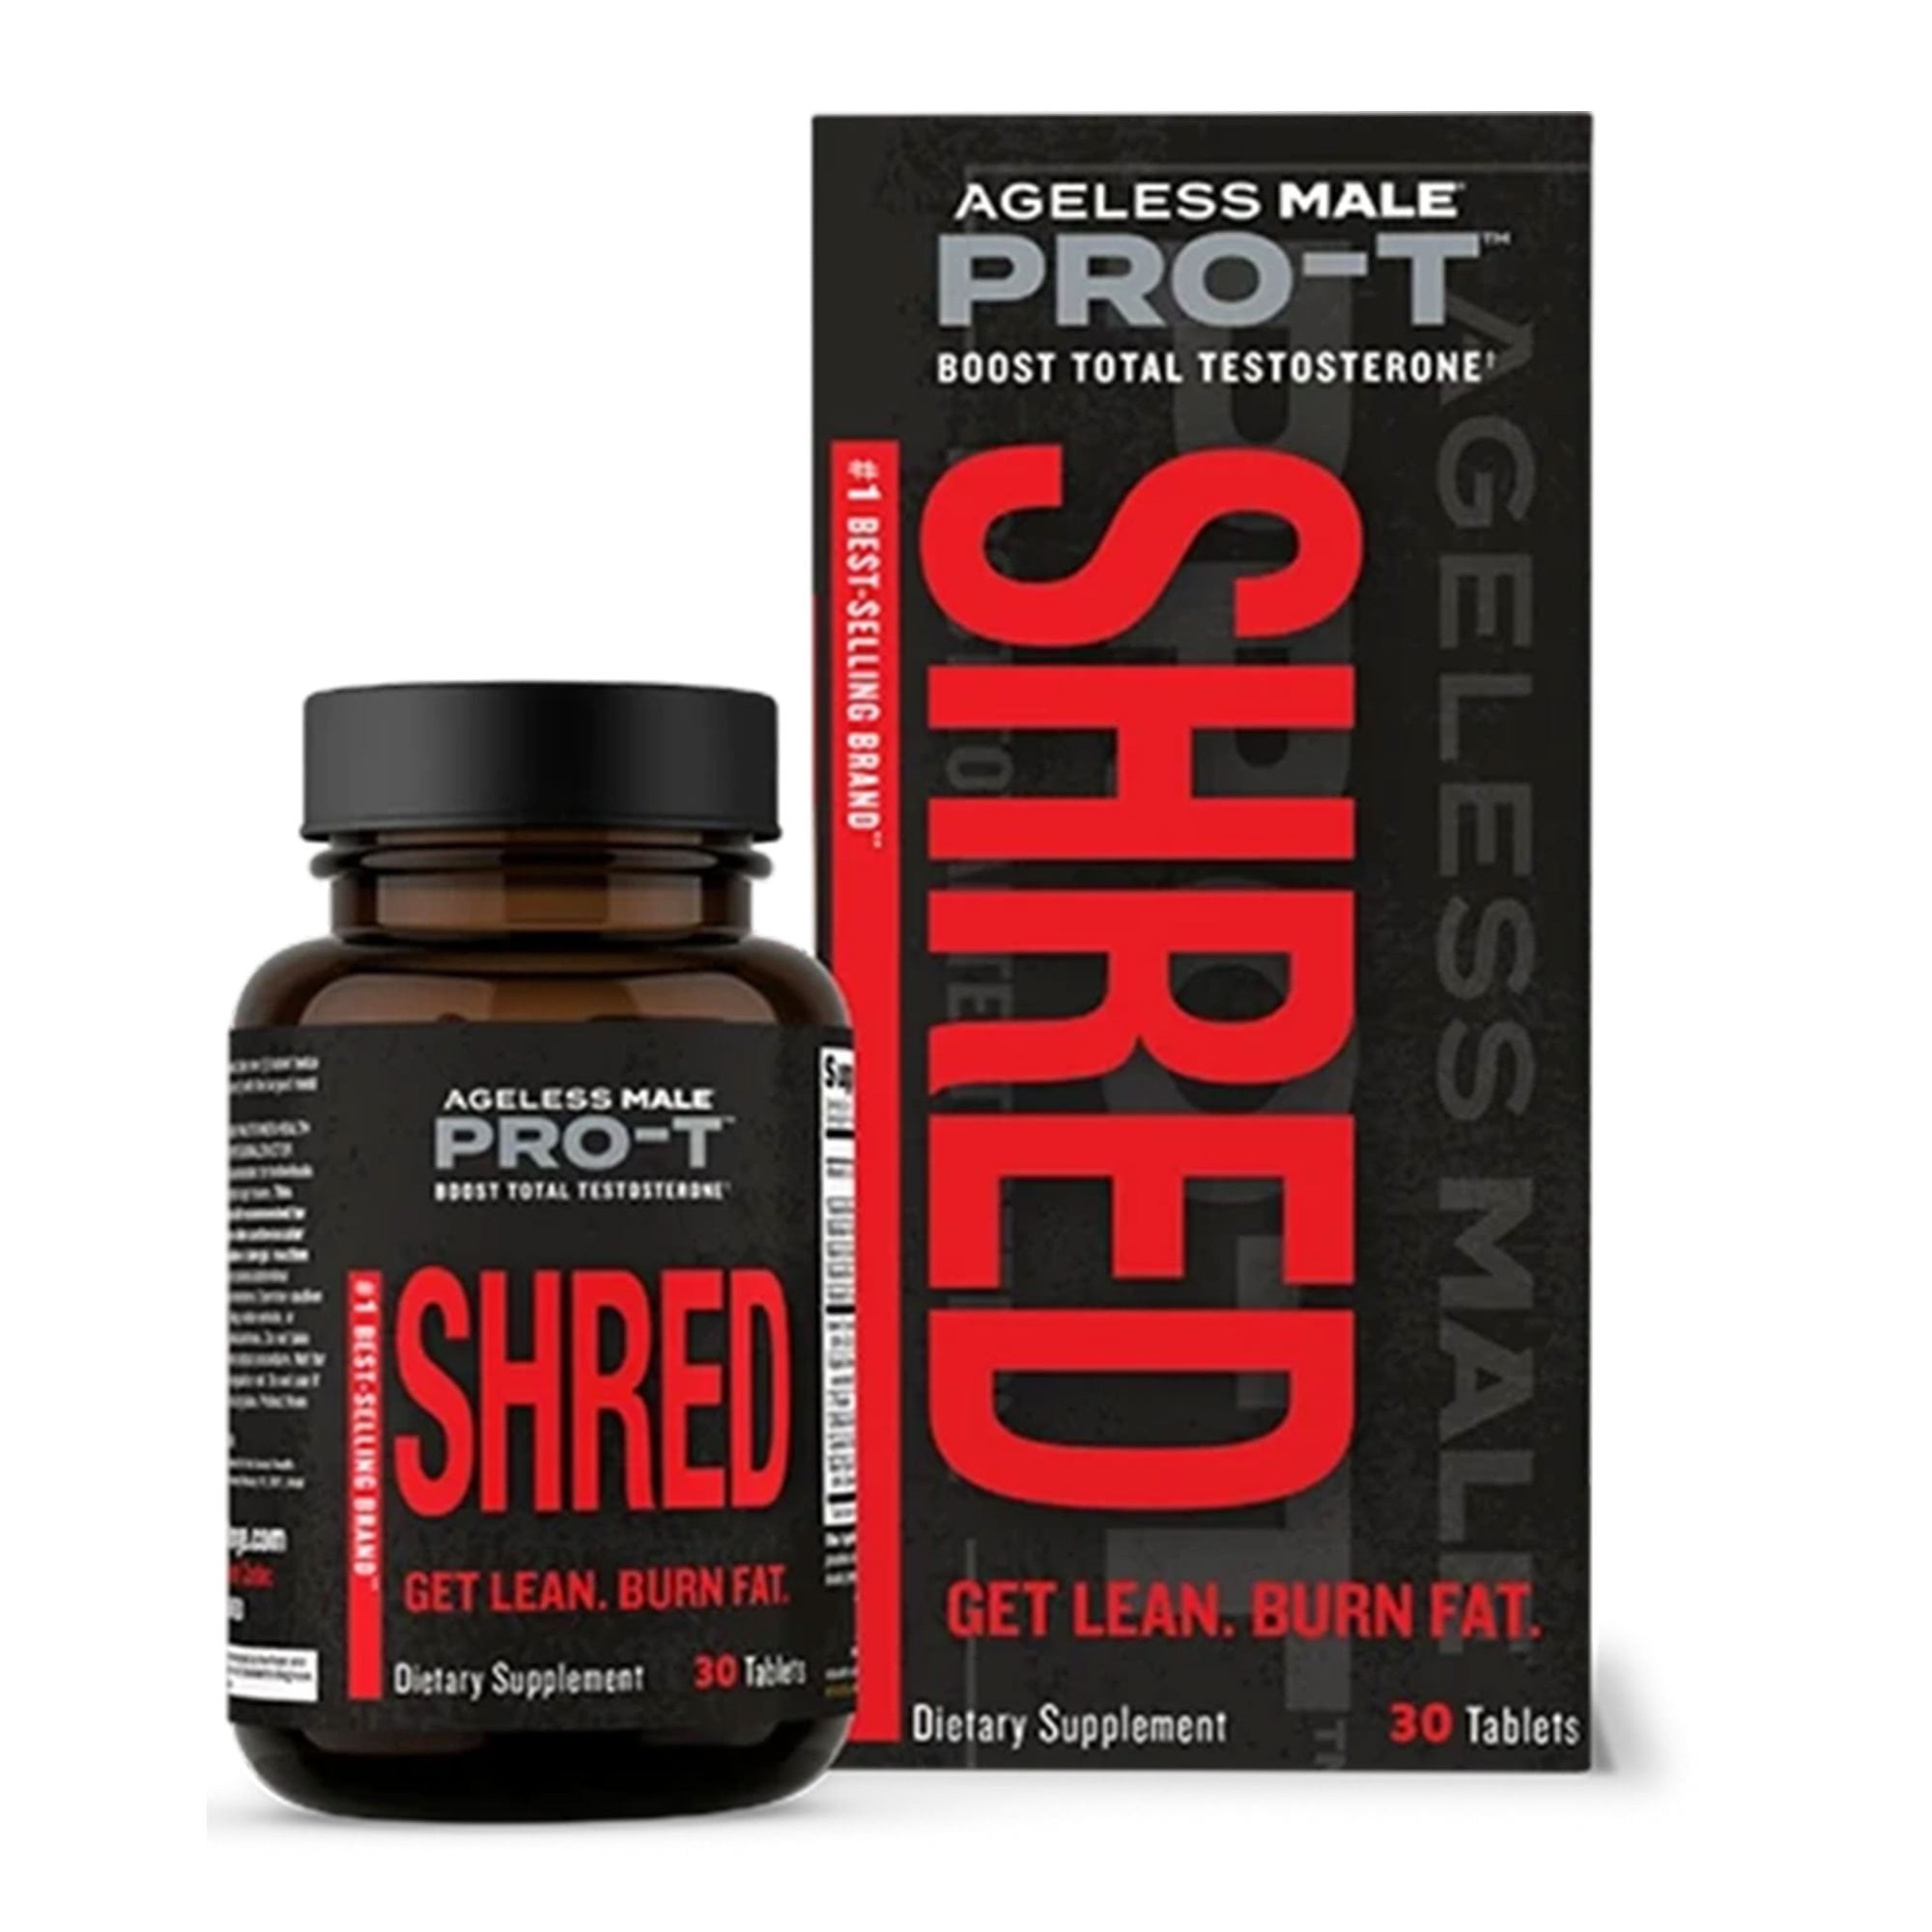 New Vitality Ageless Male Pro-T Shred, Fat Burner & Total Testosterone Booster Tablets, 30 Ct